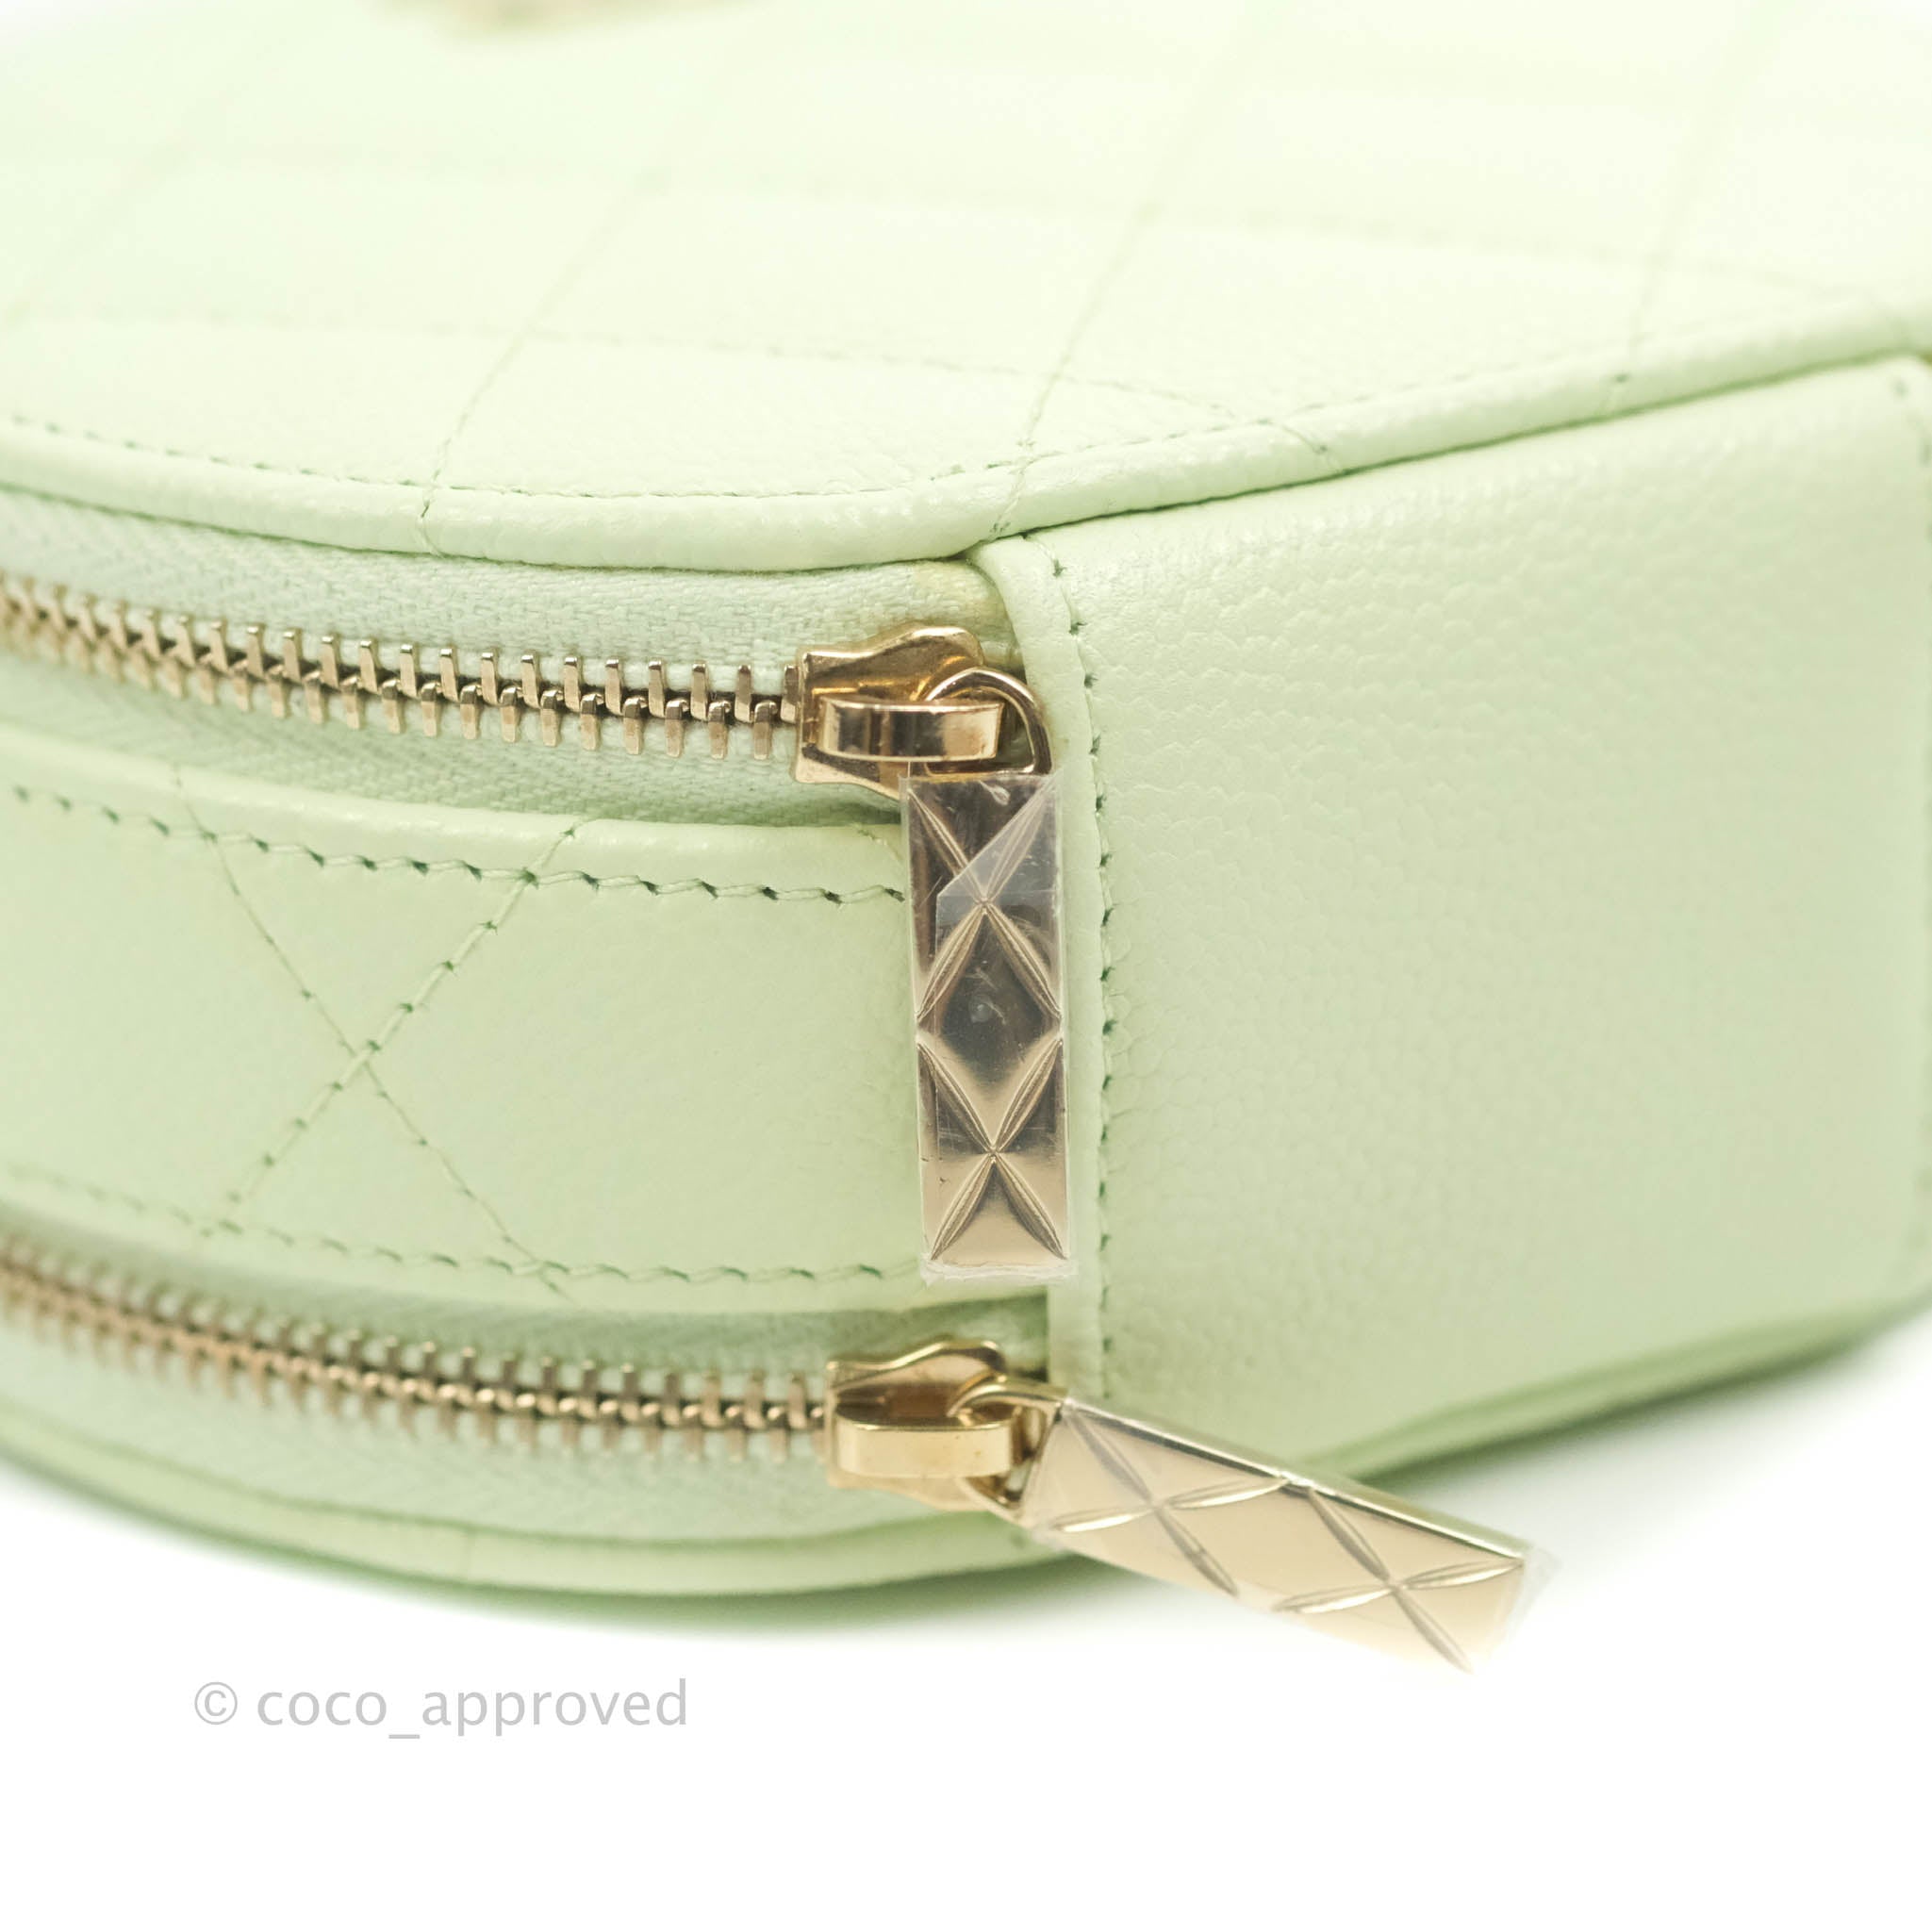 Chanel Light Green Quilted Caviar Round 'Handle With Care' Vanity